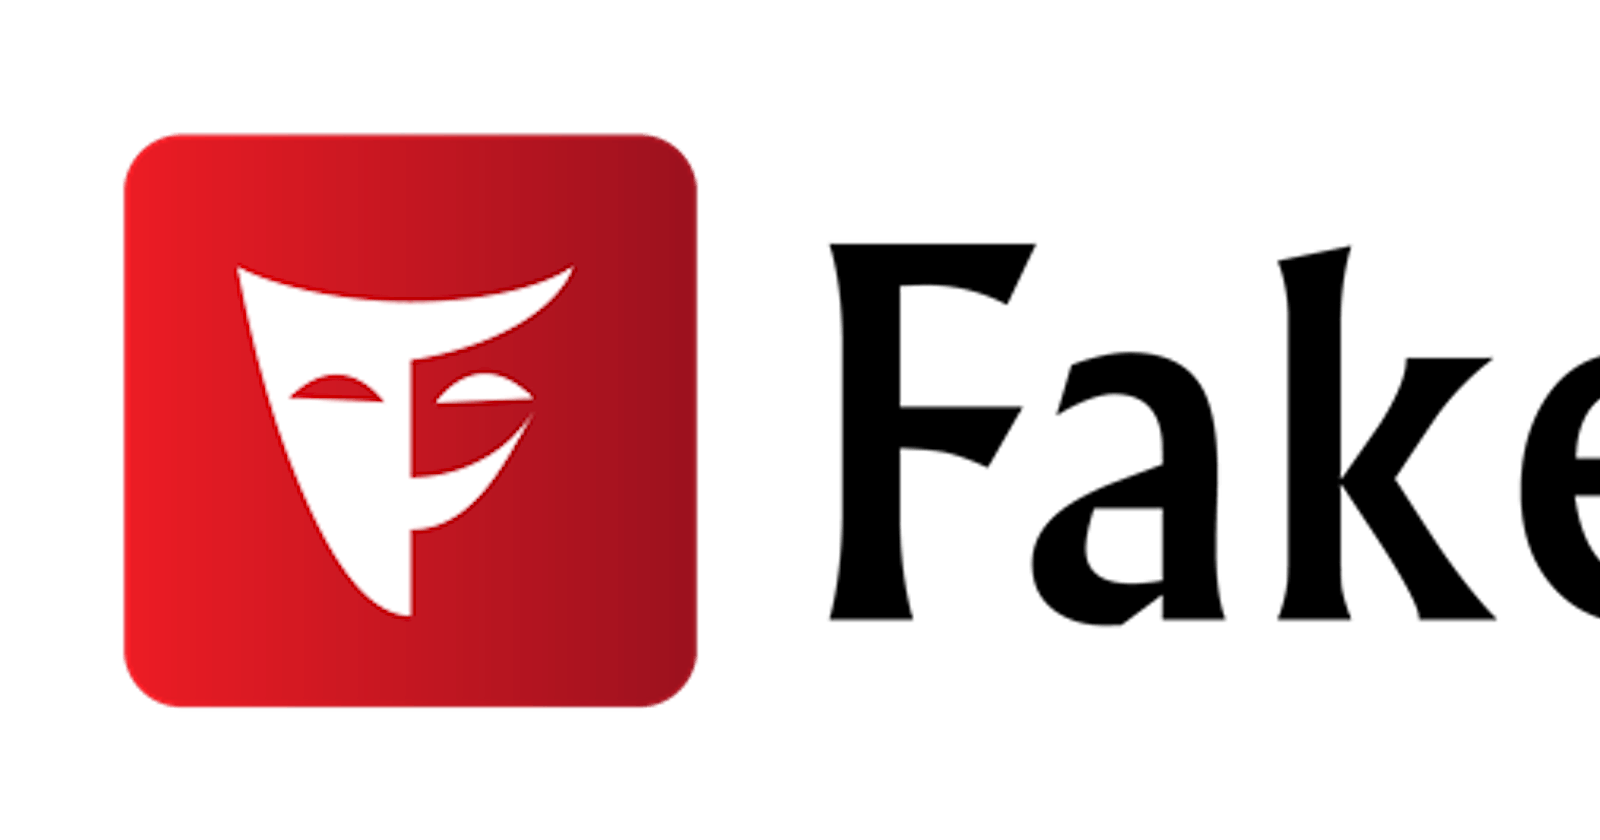 How to install and configure the Faker gem to create data for a Ruby on Rails application